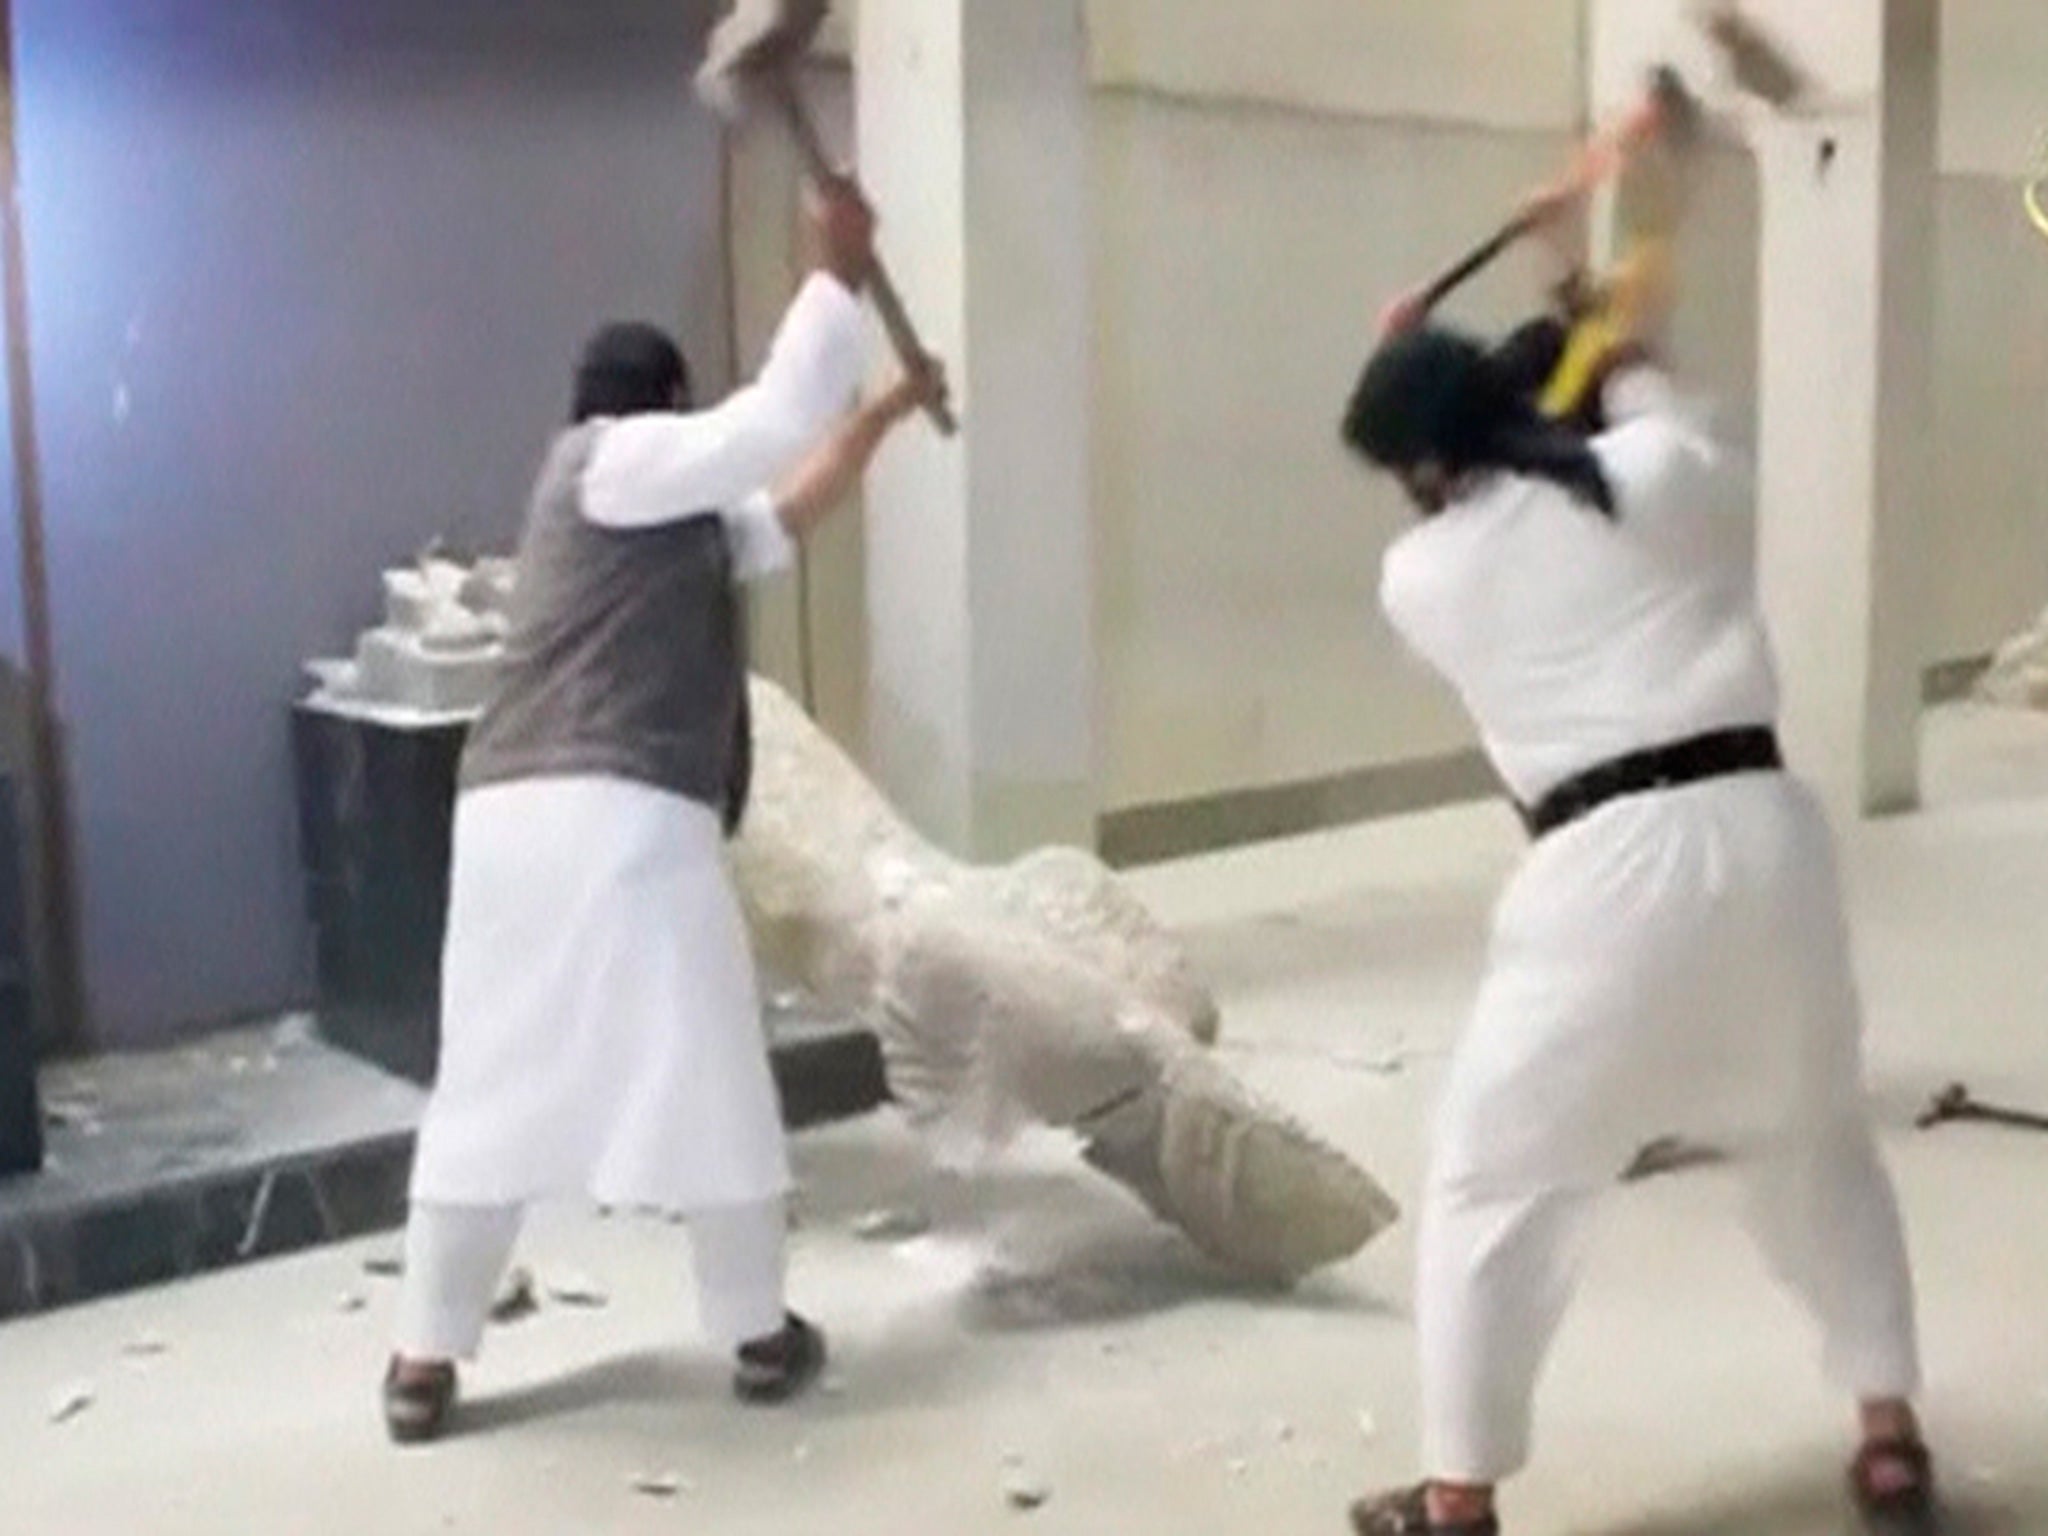 Isis previously a video showing the destruction of statues in Mosul